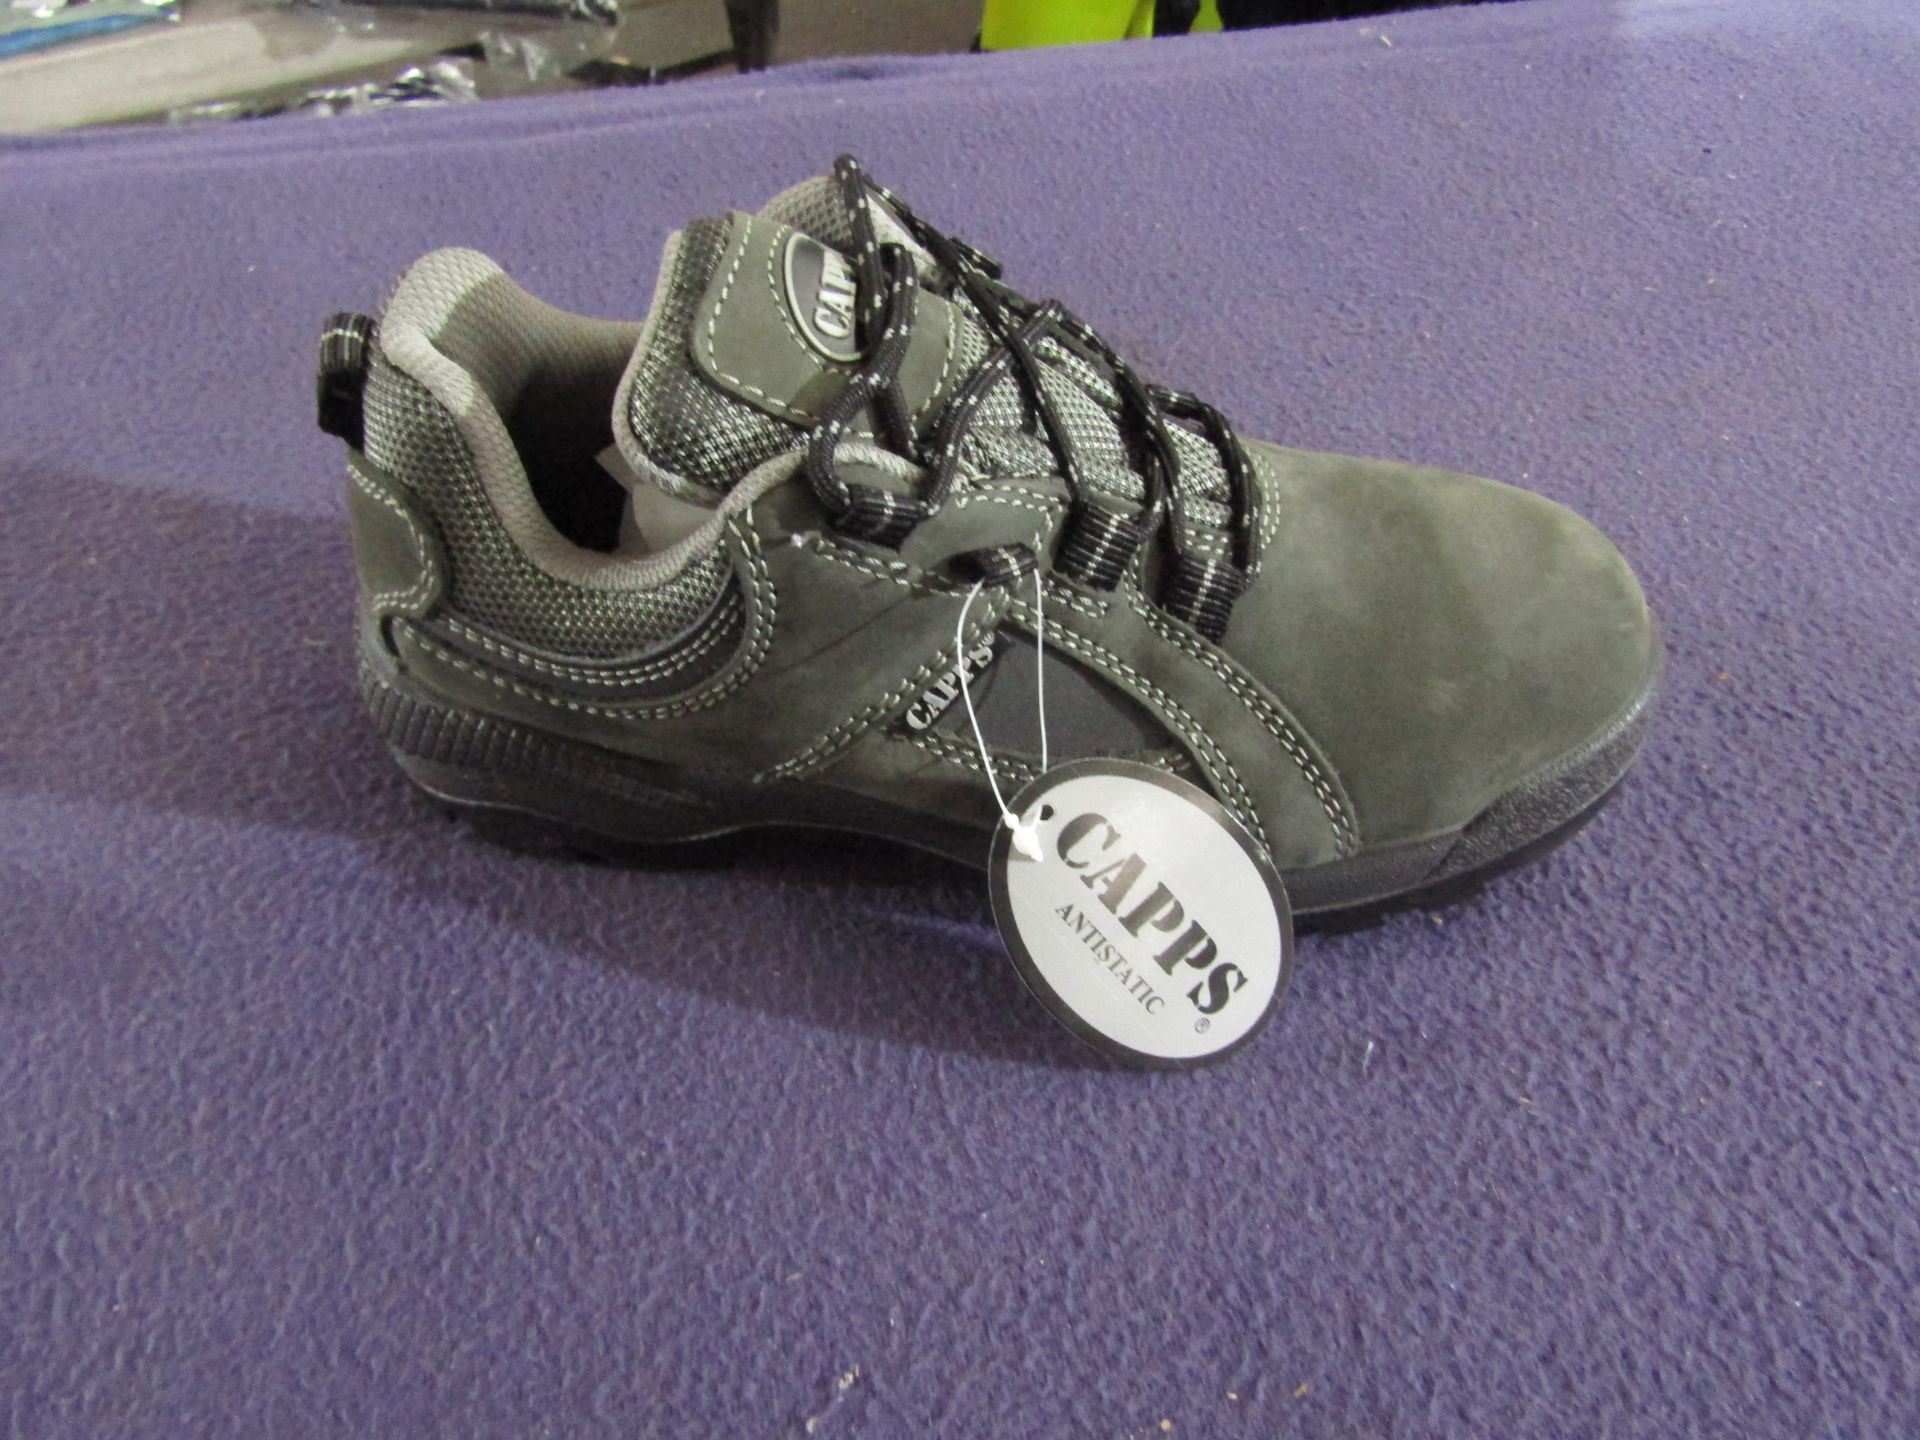 CAPPS - Nubuck Grey Leather trainers with Composite Toe Cap - Size 3 - Unused & Boxed.